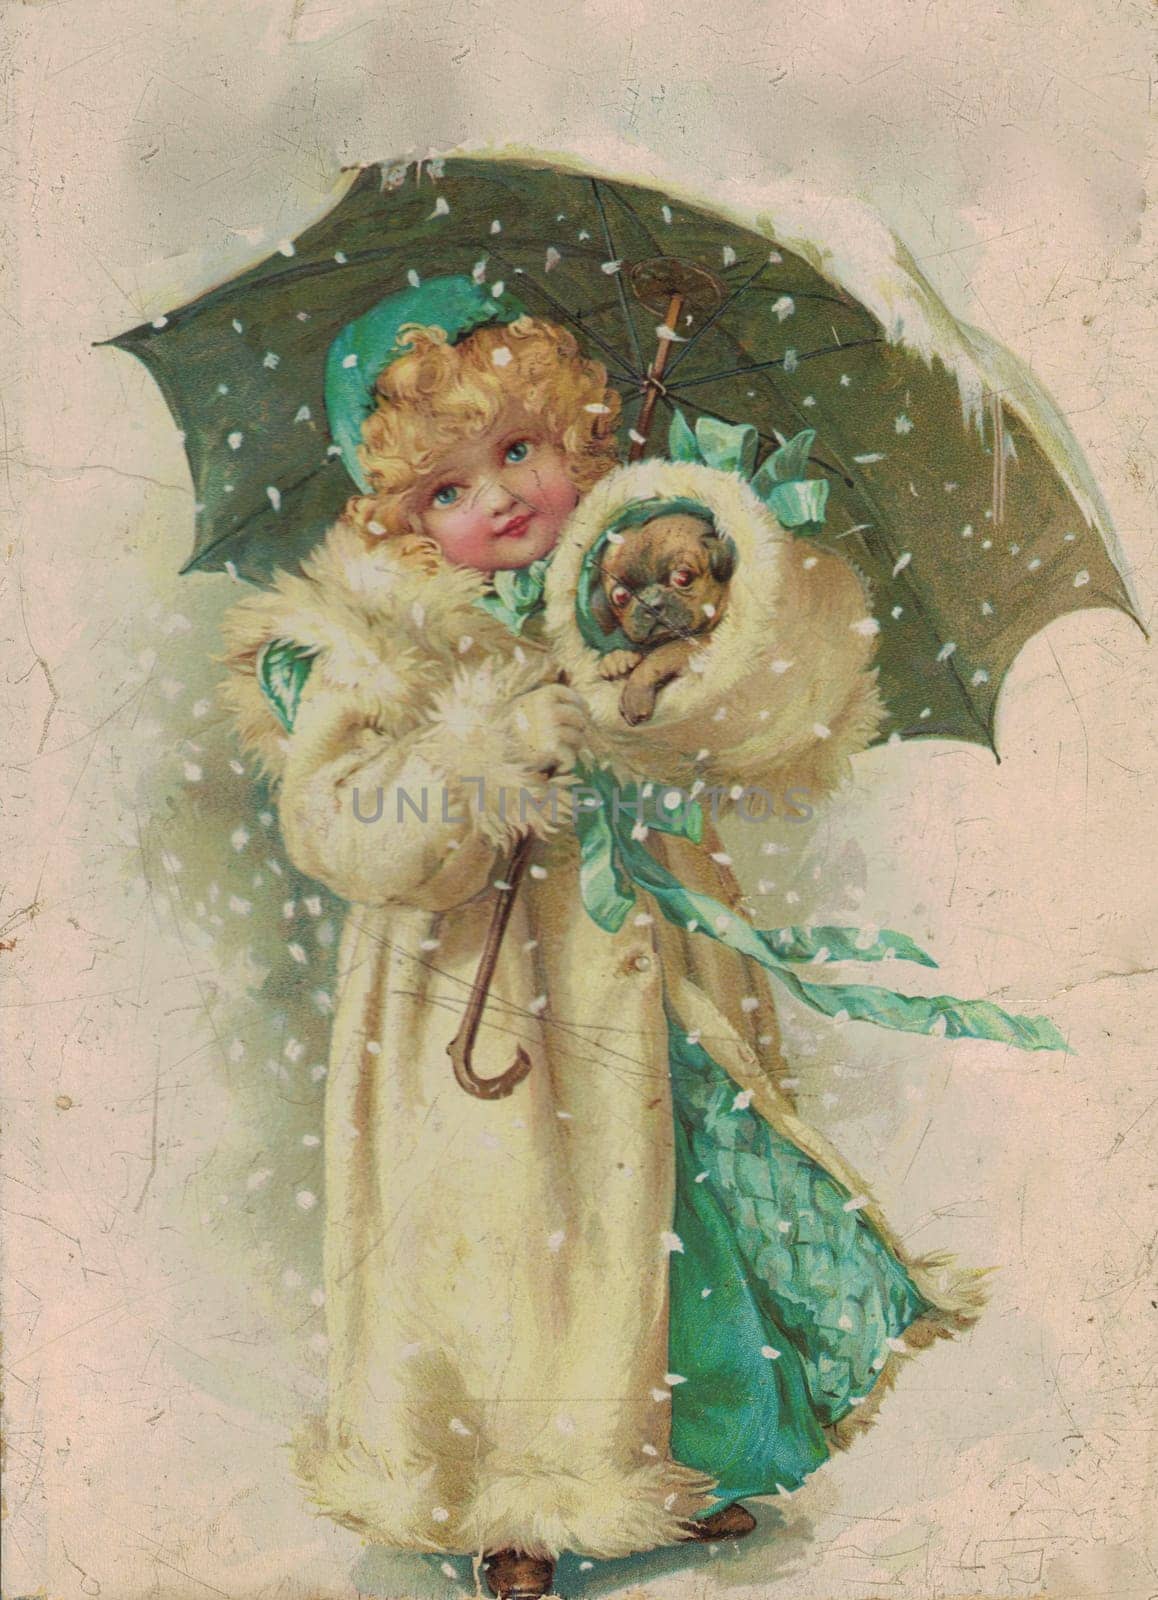 Colorful antique illustration shows a girl holds a small dog at wintertime. Vintage drawing shows the girl carries a little dog and holds umbrella in winter. Old picture from fairy tale book. Storybook illustration published 1910. A fairy tale, fairytale, wonder tale, magic tale, fairy story or Marchen is an instance of folklore genre that takes the form of a short story. Such stories typically feature mythical entities such as dwarfs, dragons, elves, fairies and Peris, giants, Divs, gnomes, goblins, griffins, mermaids, talking animals, trolls, unicorns, or witches, and usually magic or enchantments.